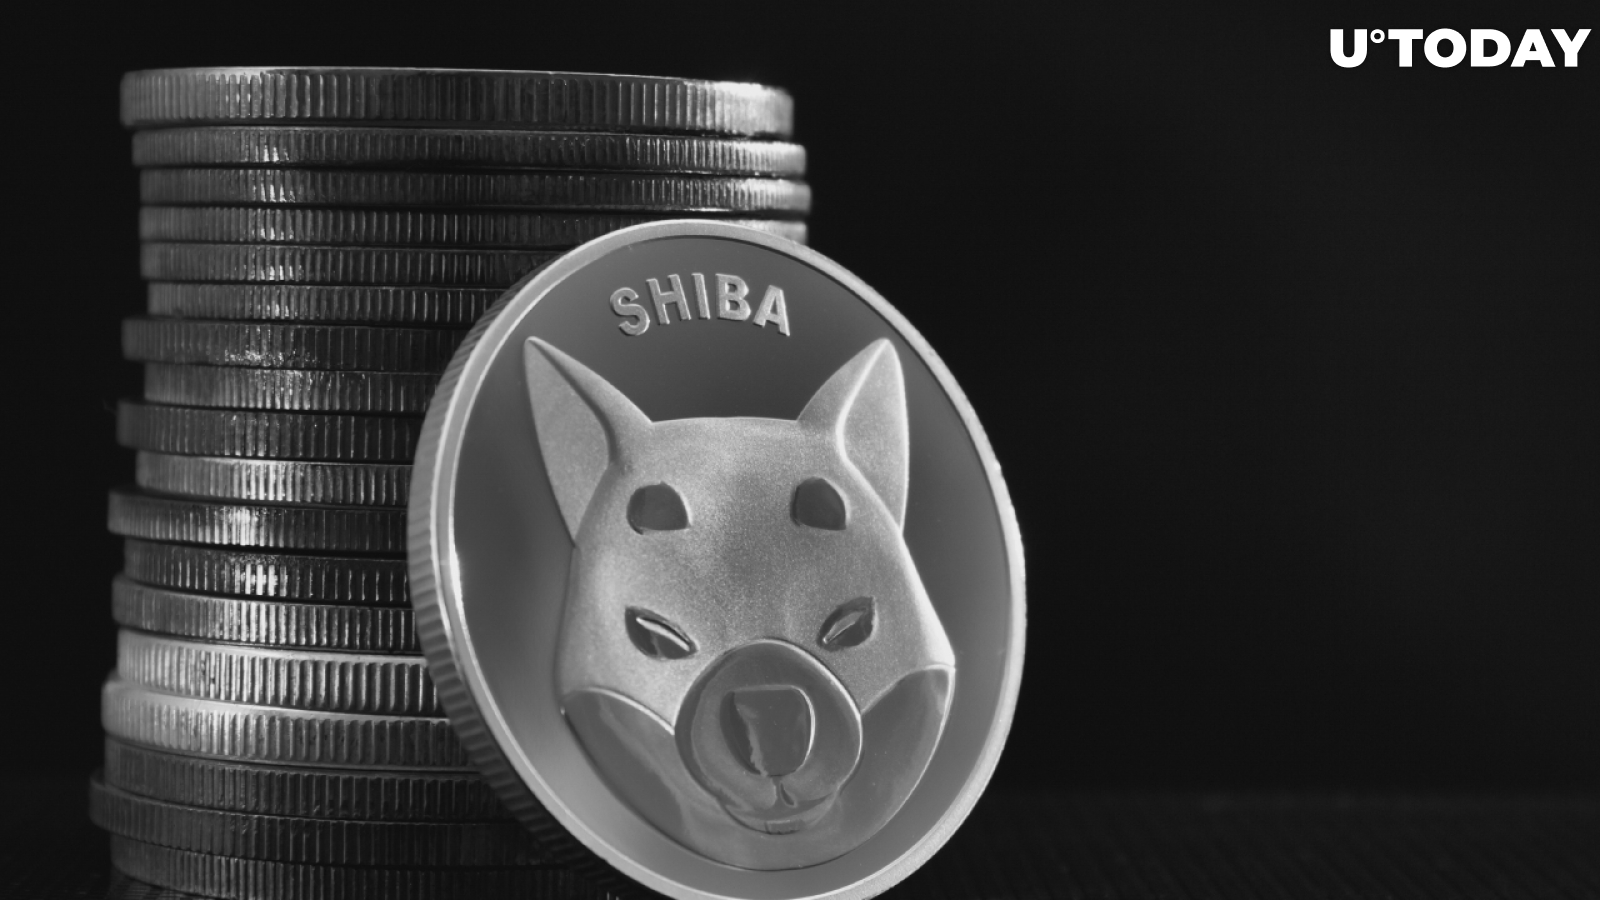 Shiba Inu Listed by Exchange of Former Morgan Stanley Developers